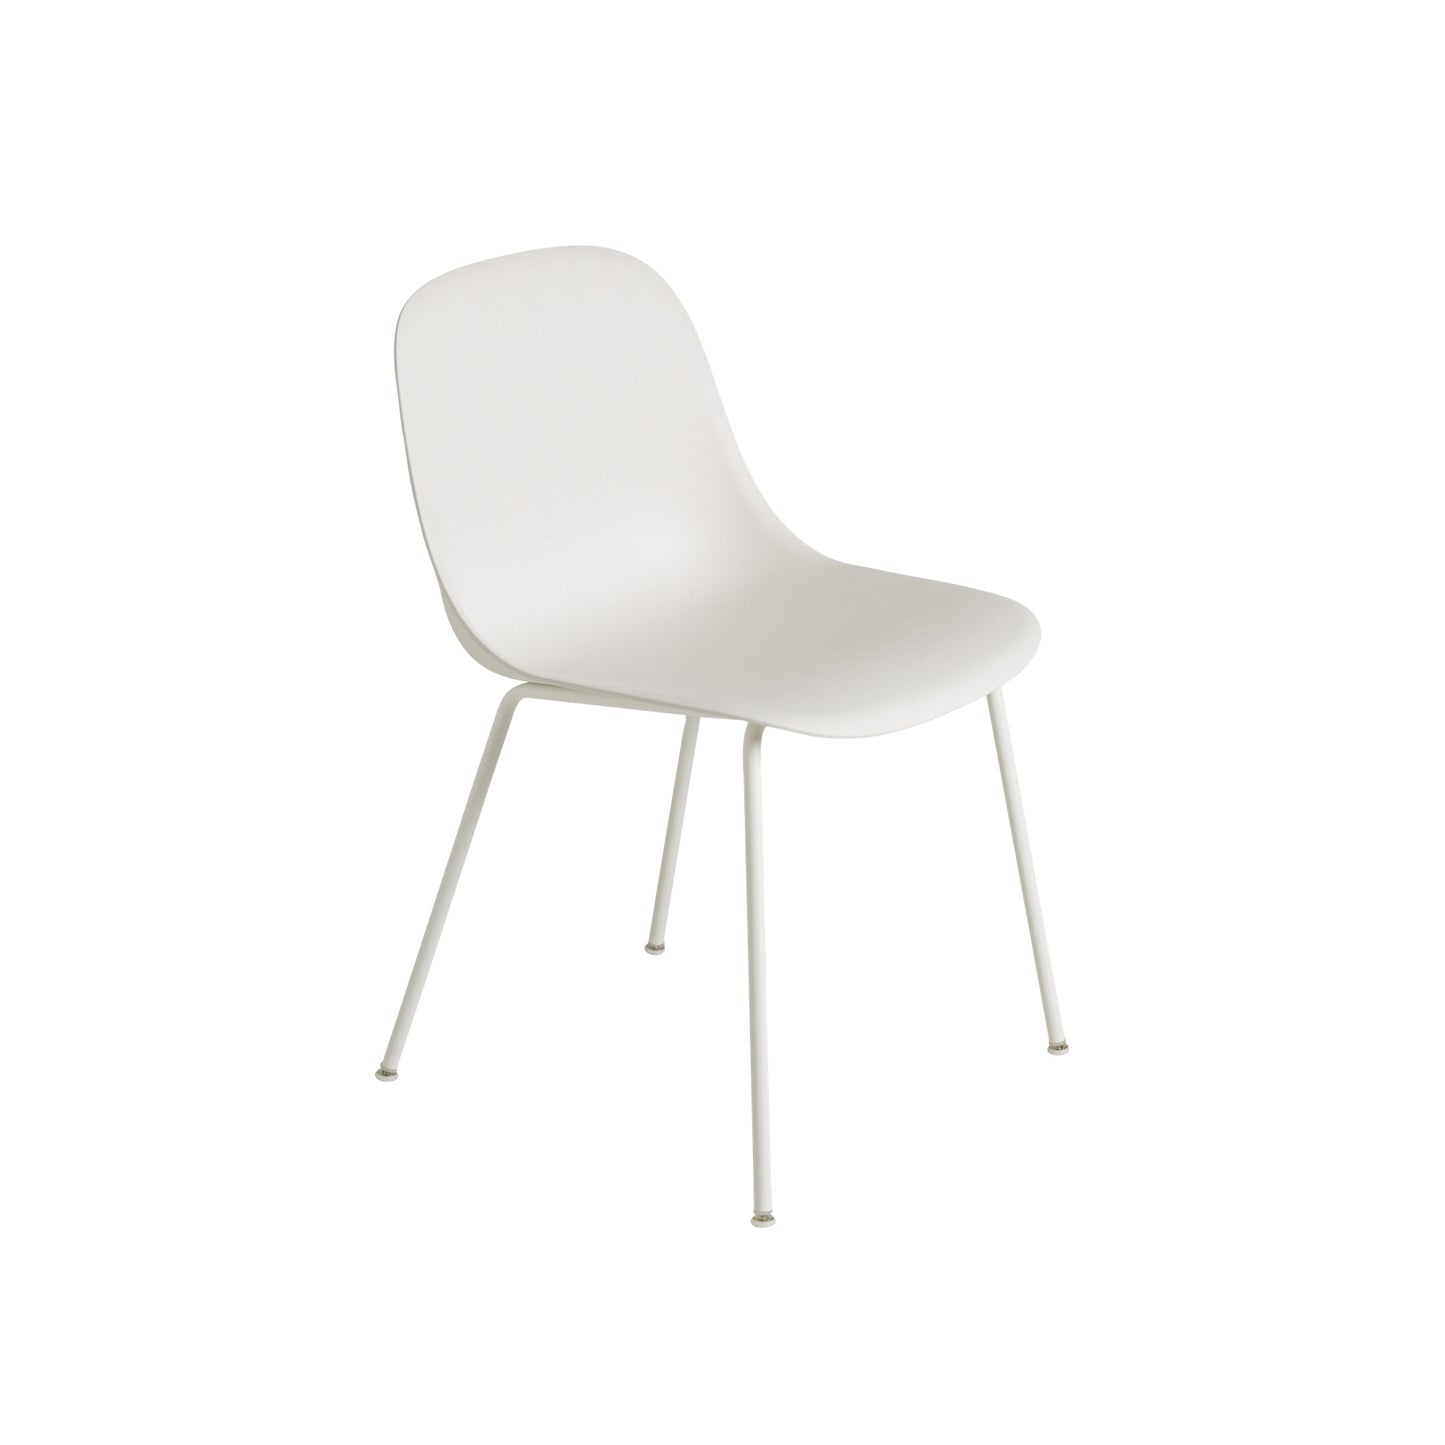 Fiber Dining Chair w. Tube Base by Muuto #White